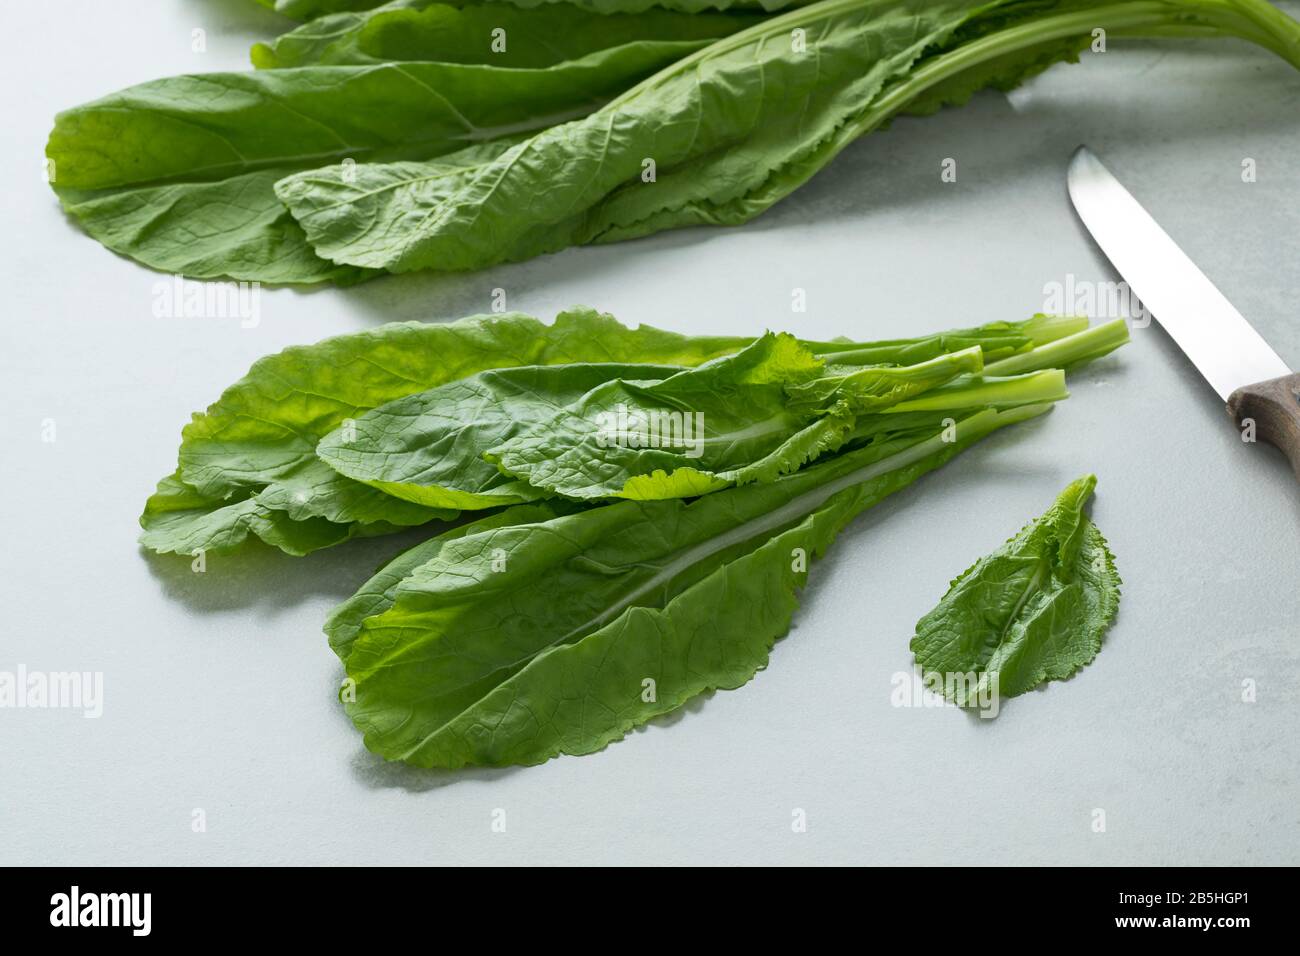 Bunch of fresh raw amsoi leaves on a cutting board Stock Photo